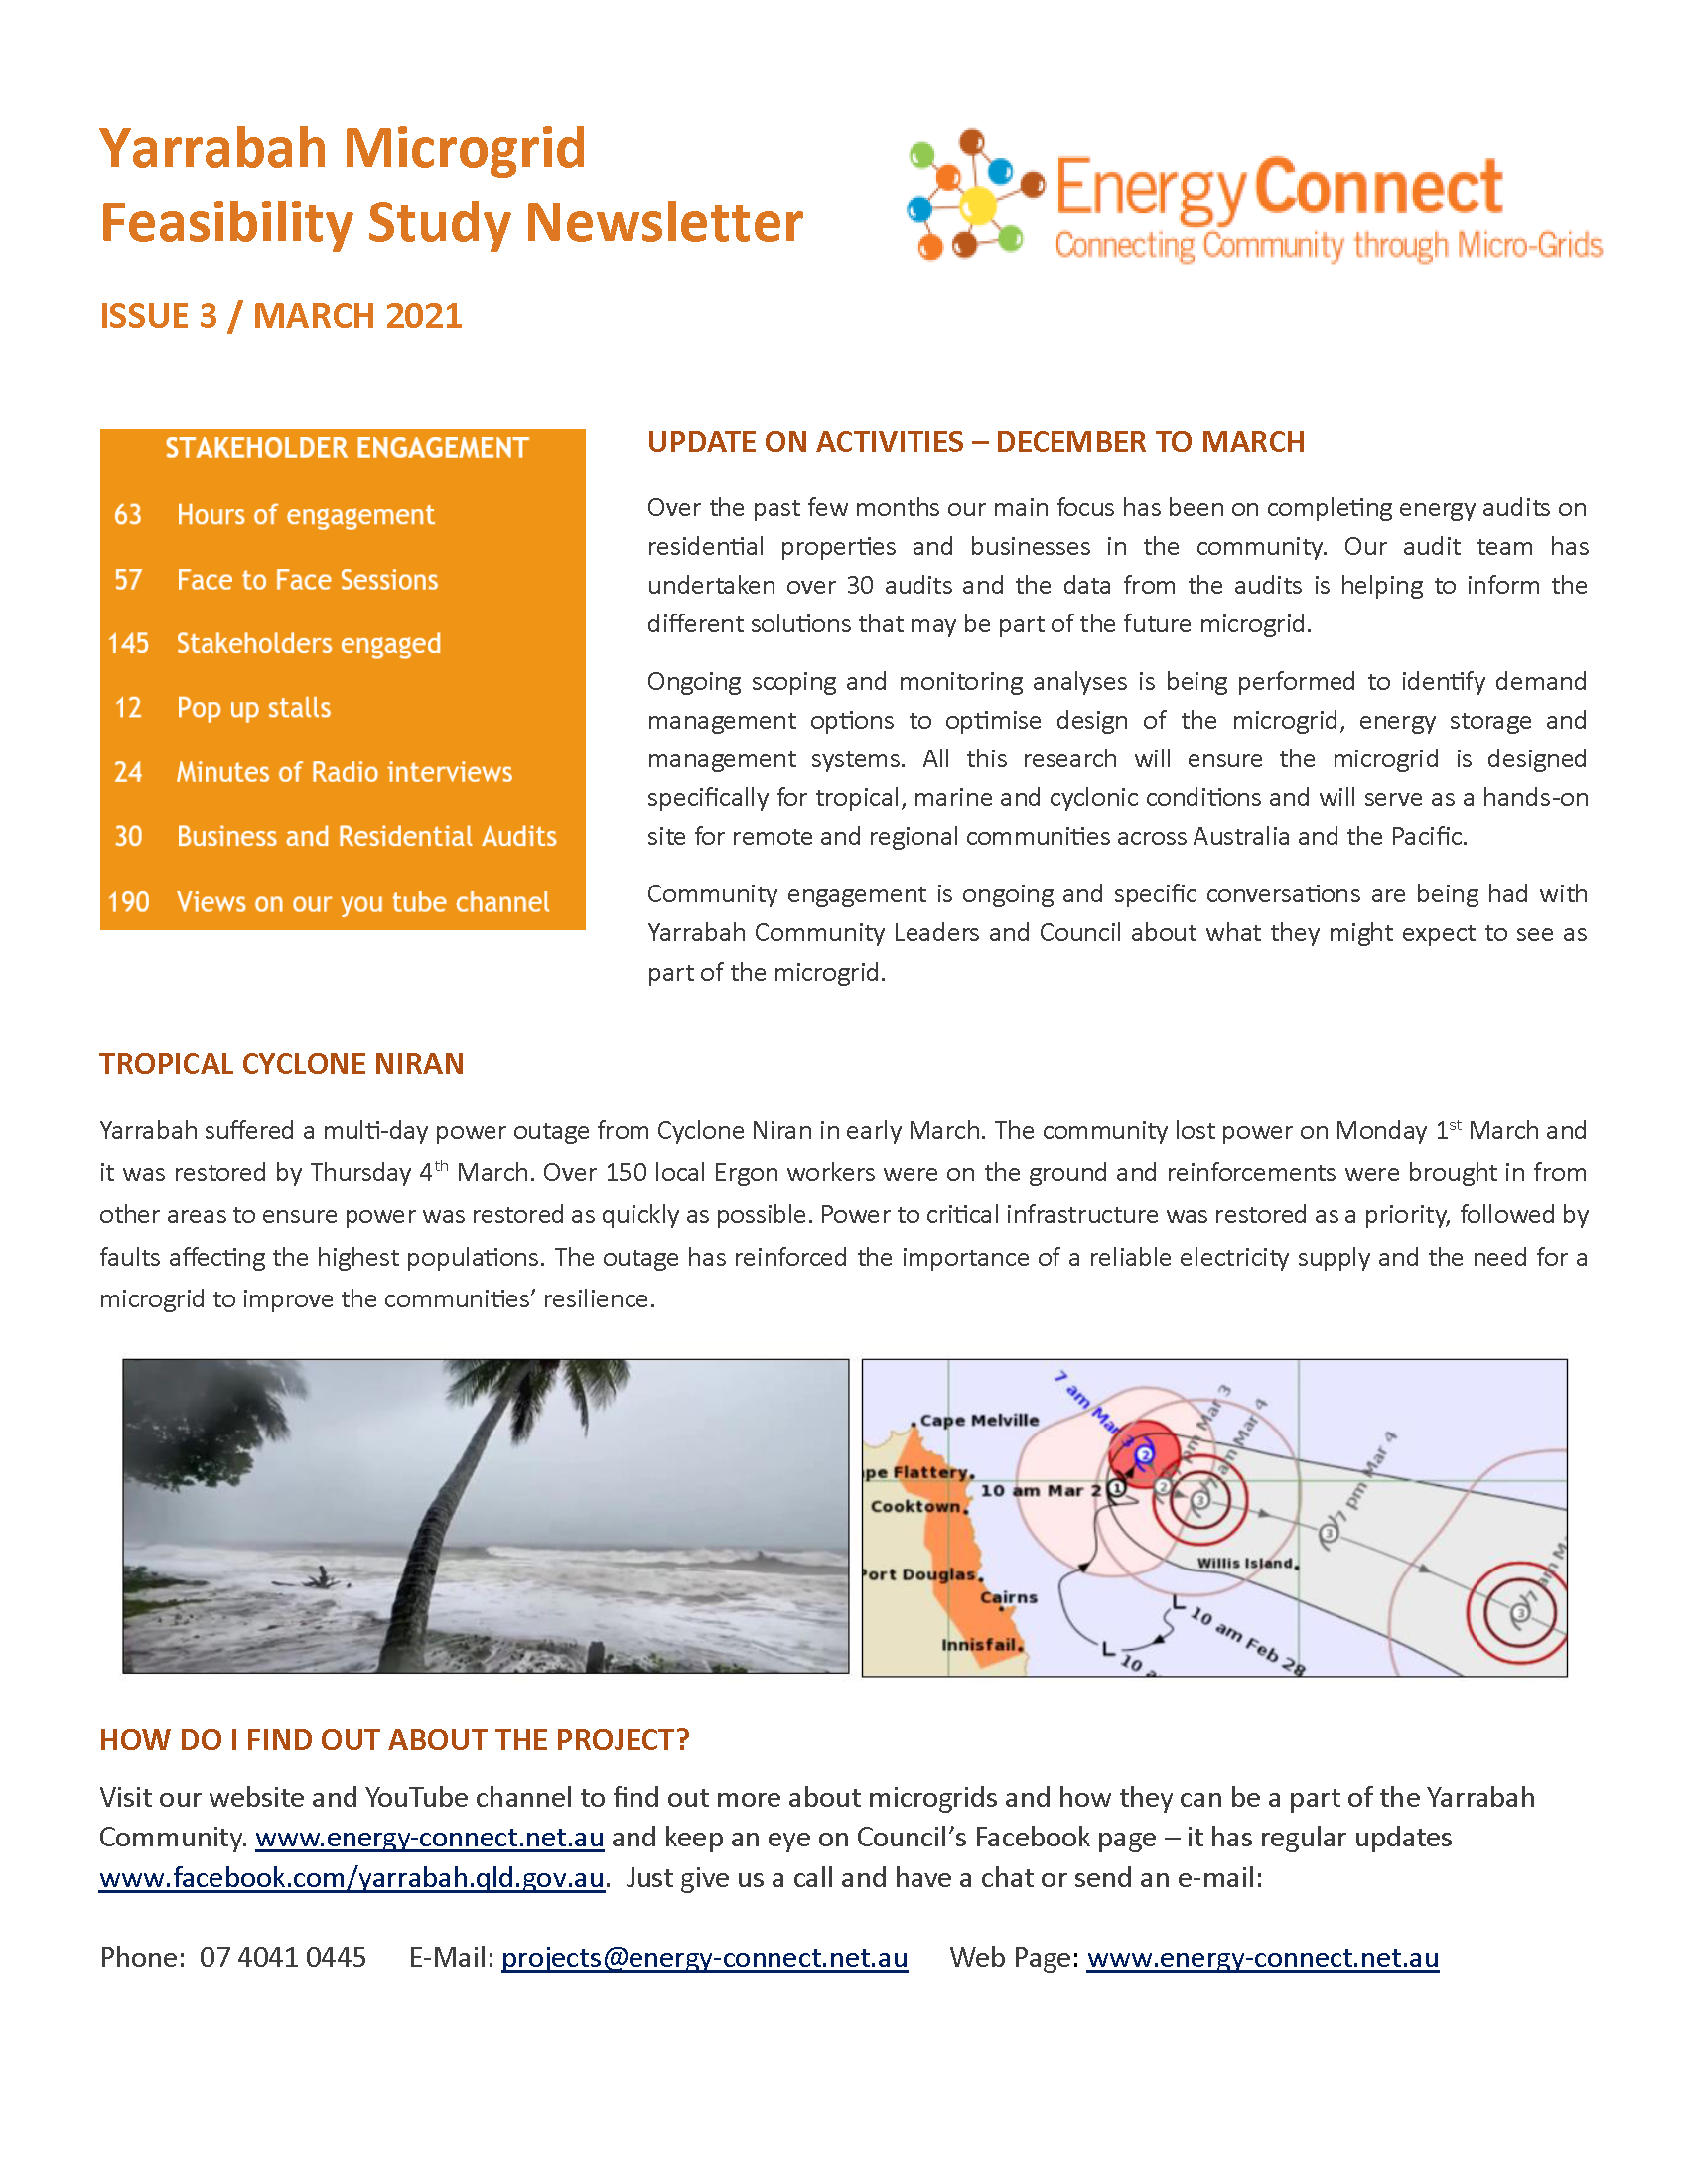 EnergyConnect - Yarrabah Microgrid Newsletter - Issue 3